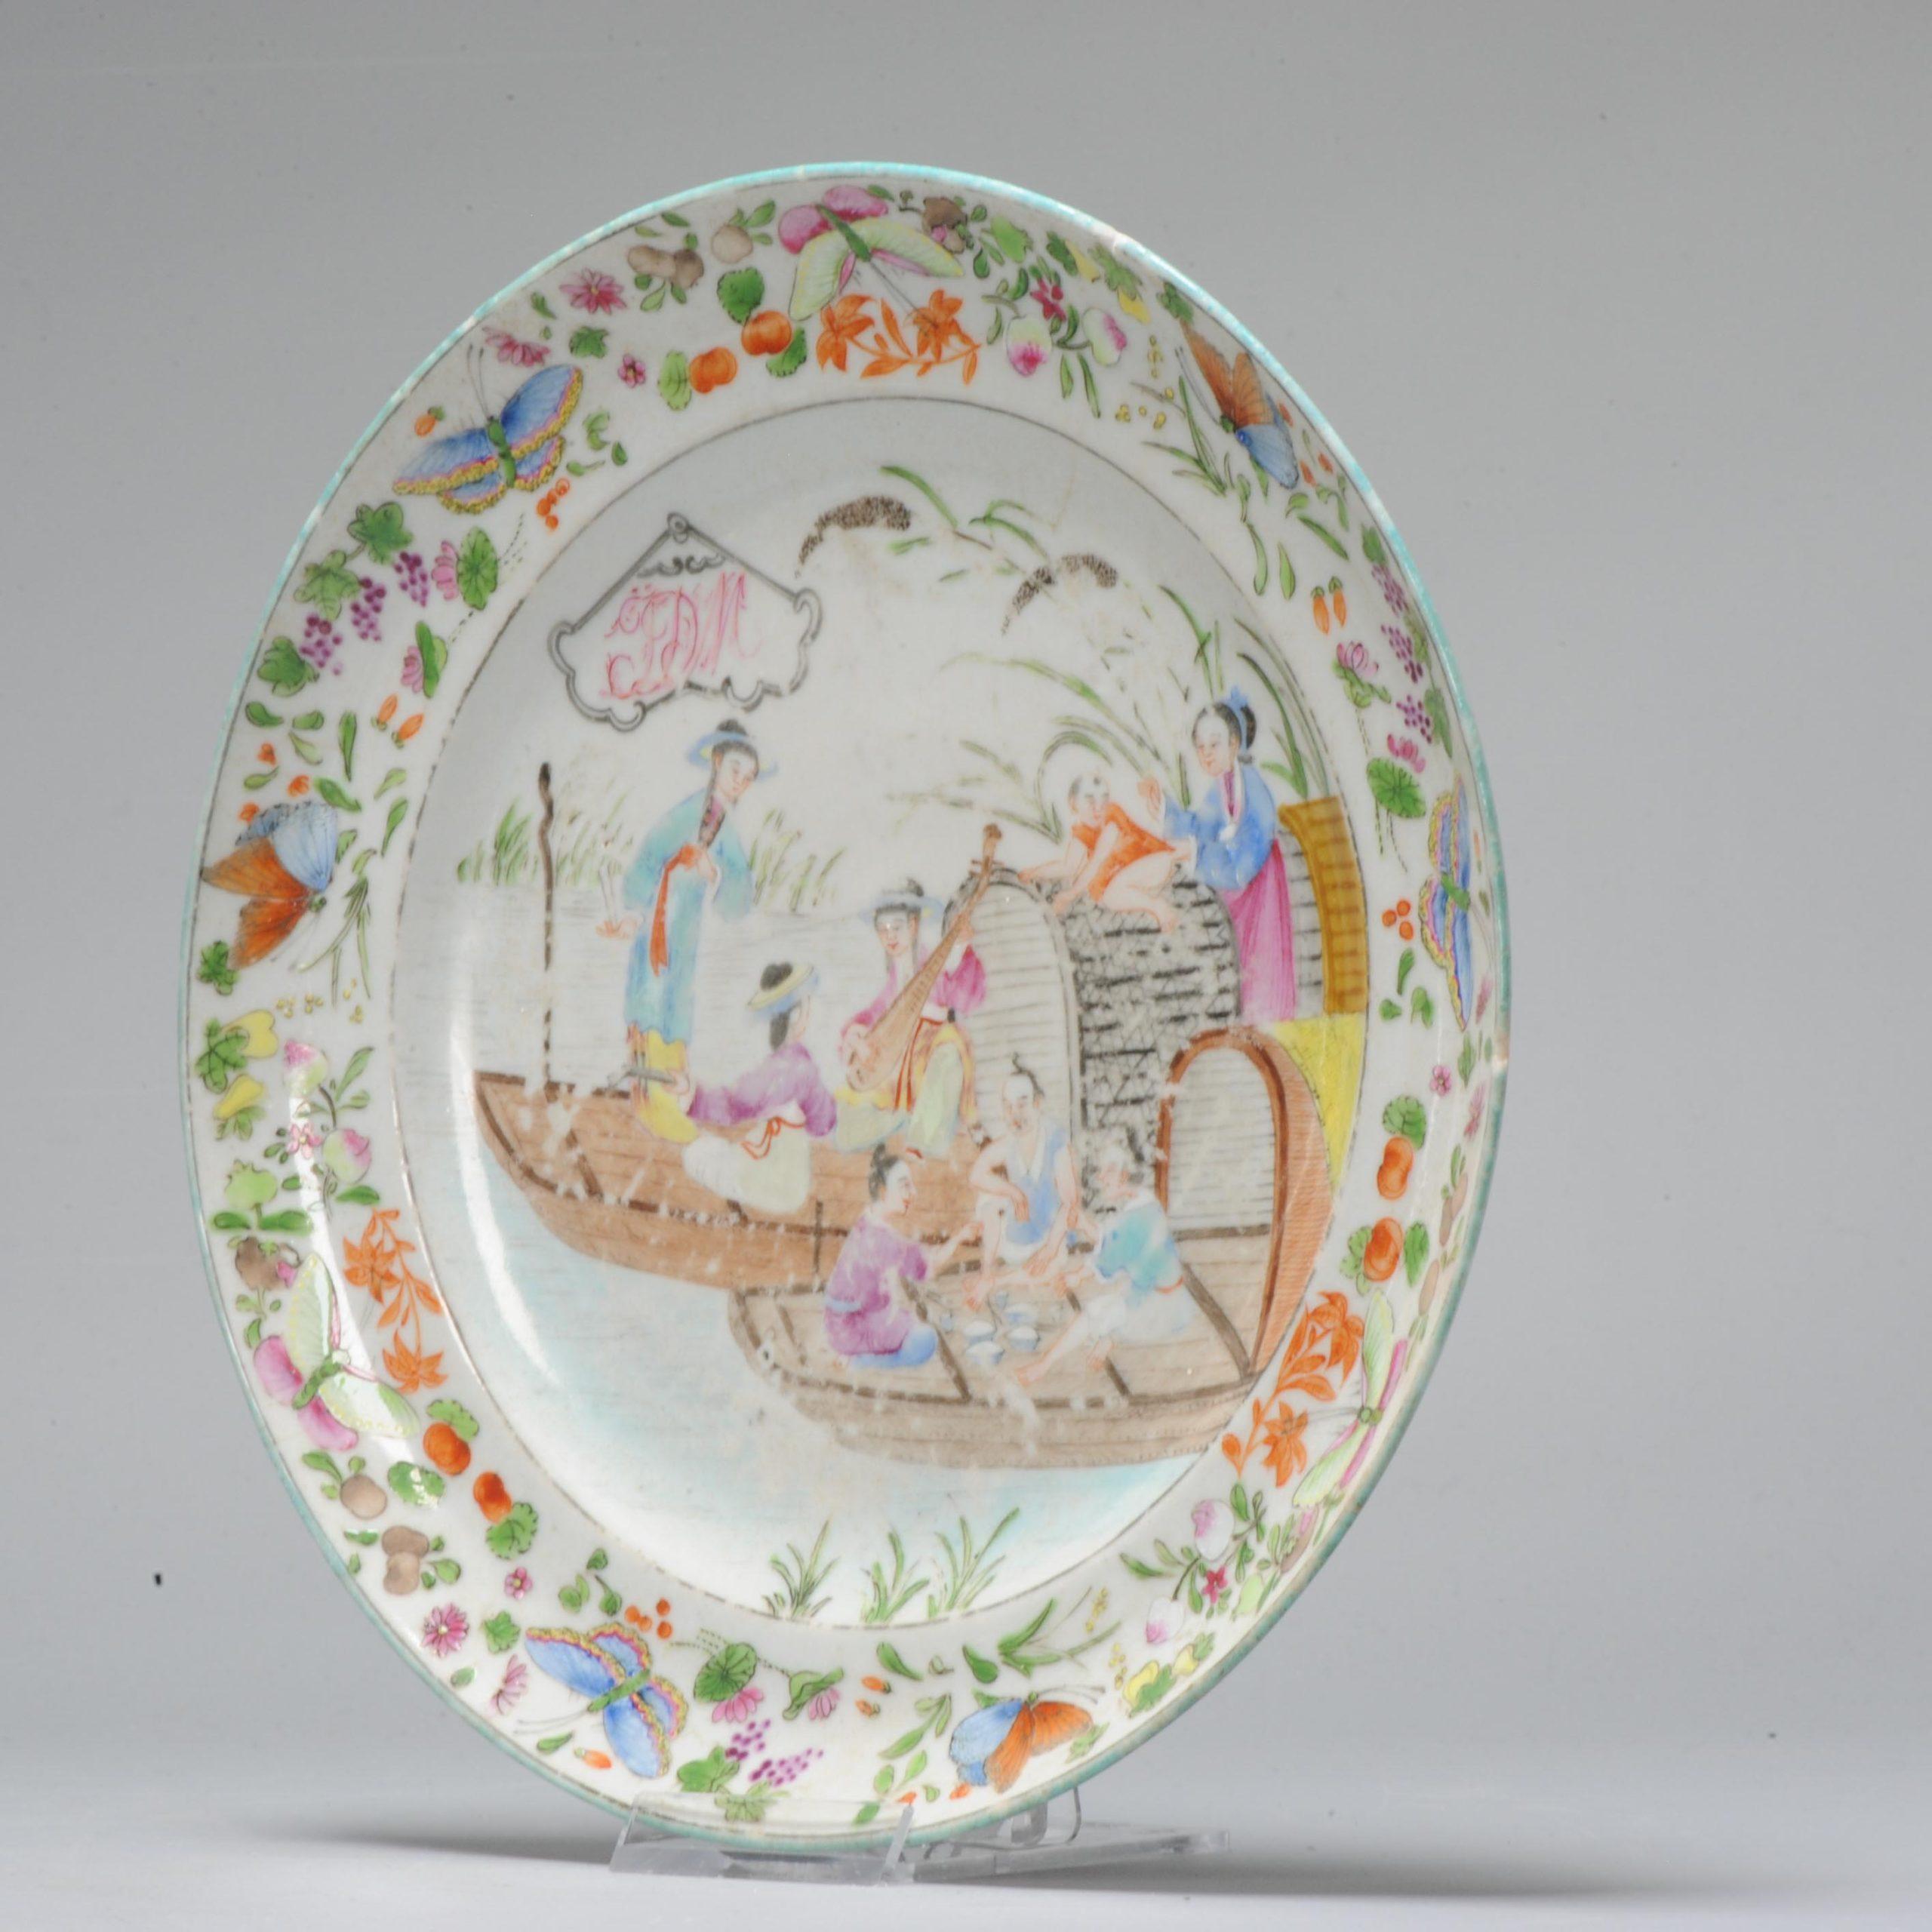 A very nice and unusual cantonese dish with armorial. Stunningly painted polychrome porcelain decorated with a river scene with boats and figures enjoying dinner and playing music. The border with a typical cantonese scene of flowers and